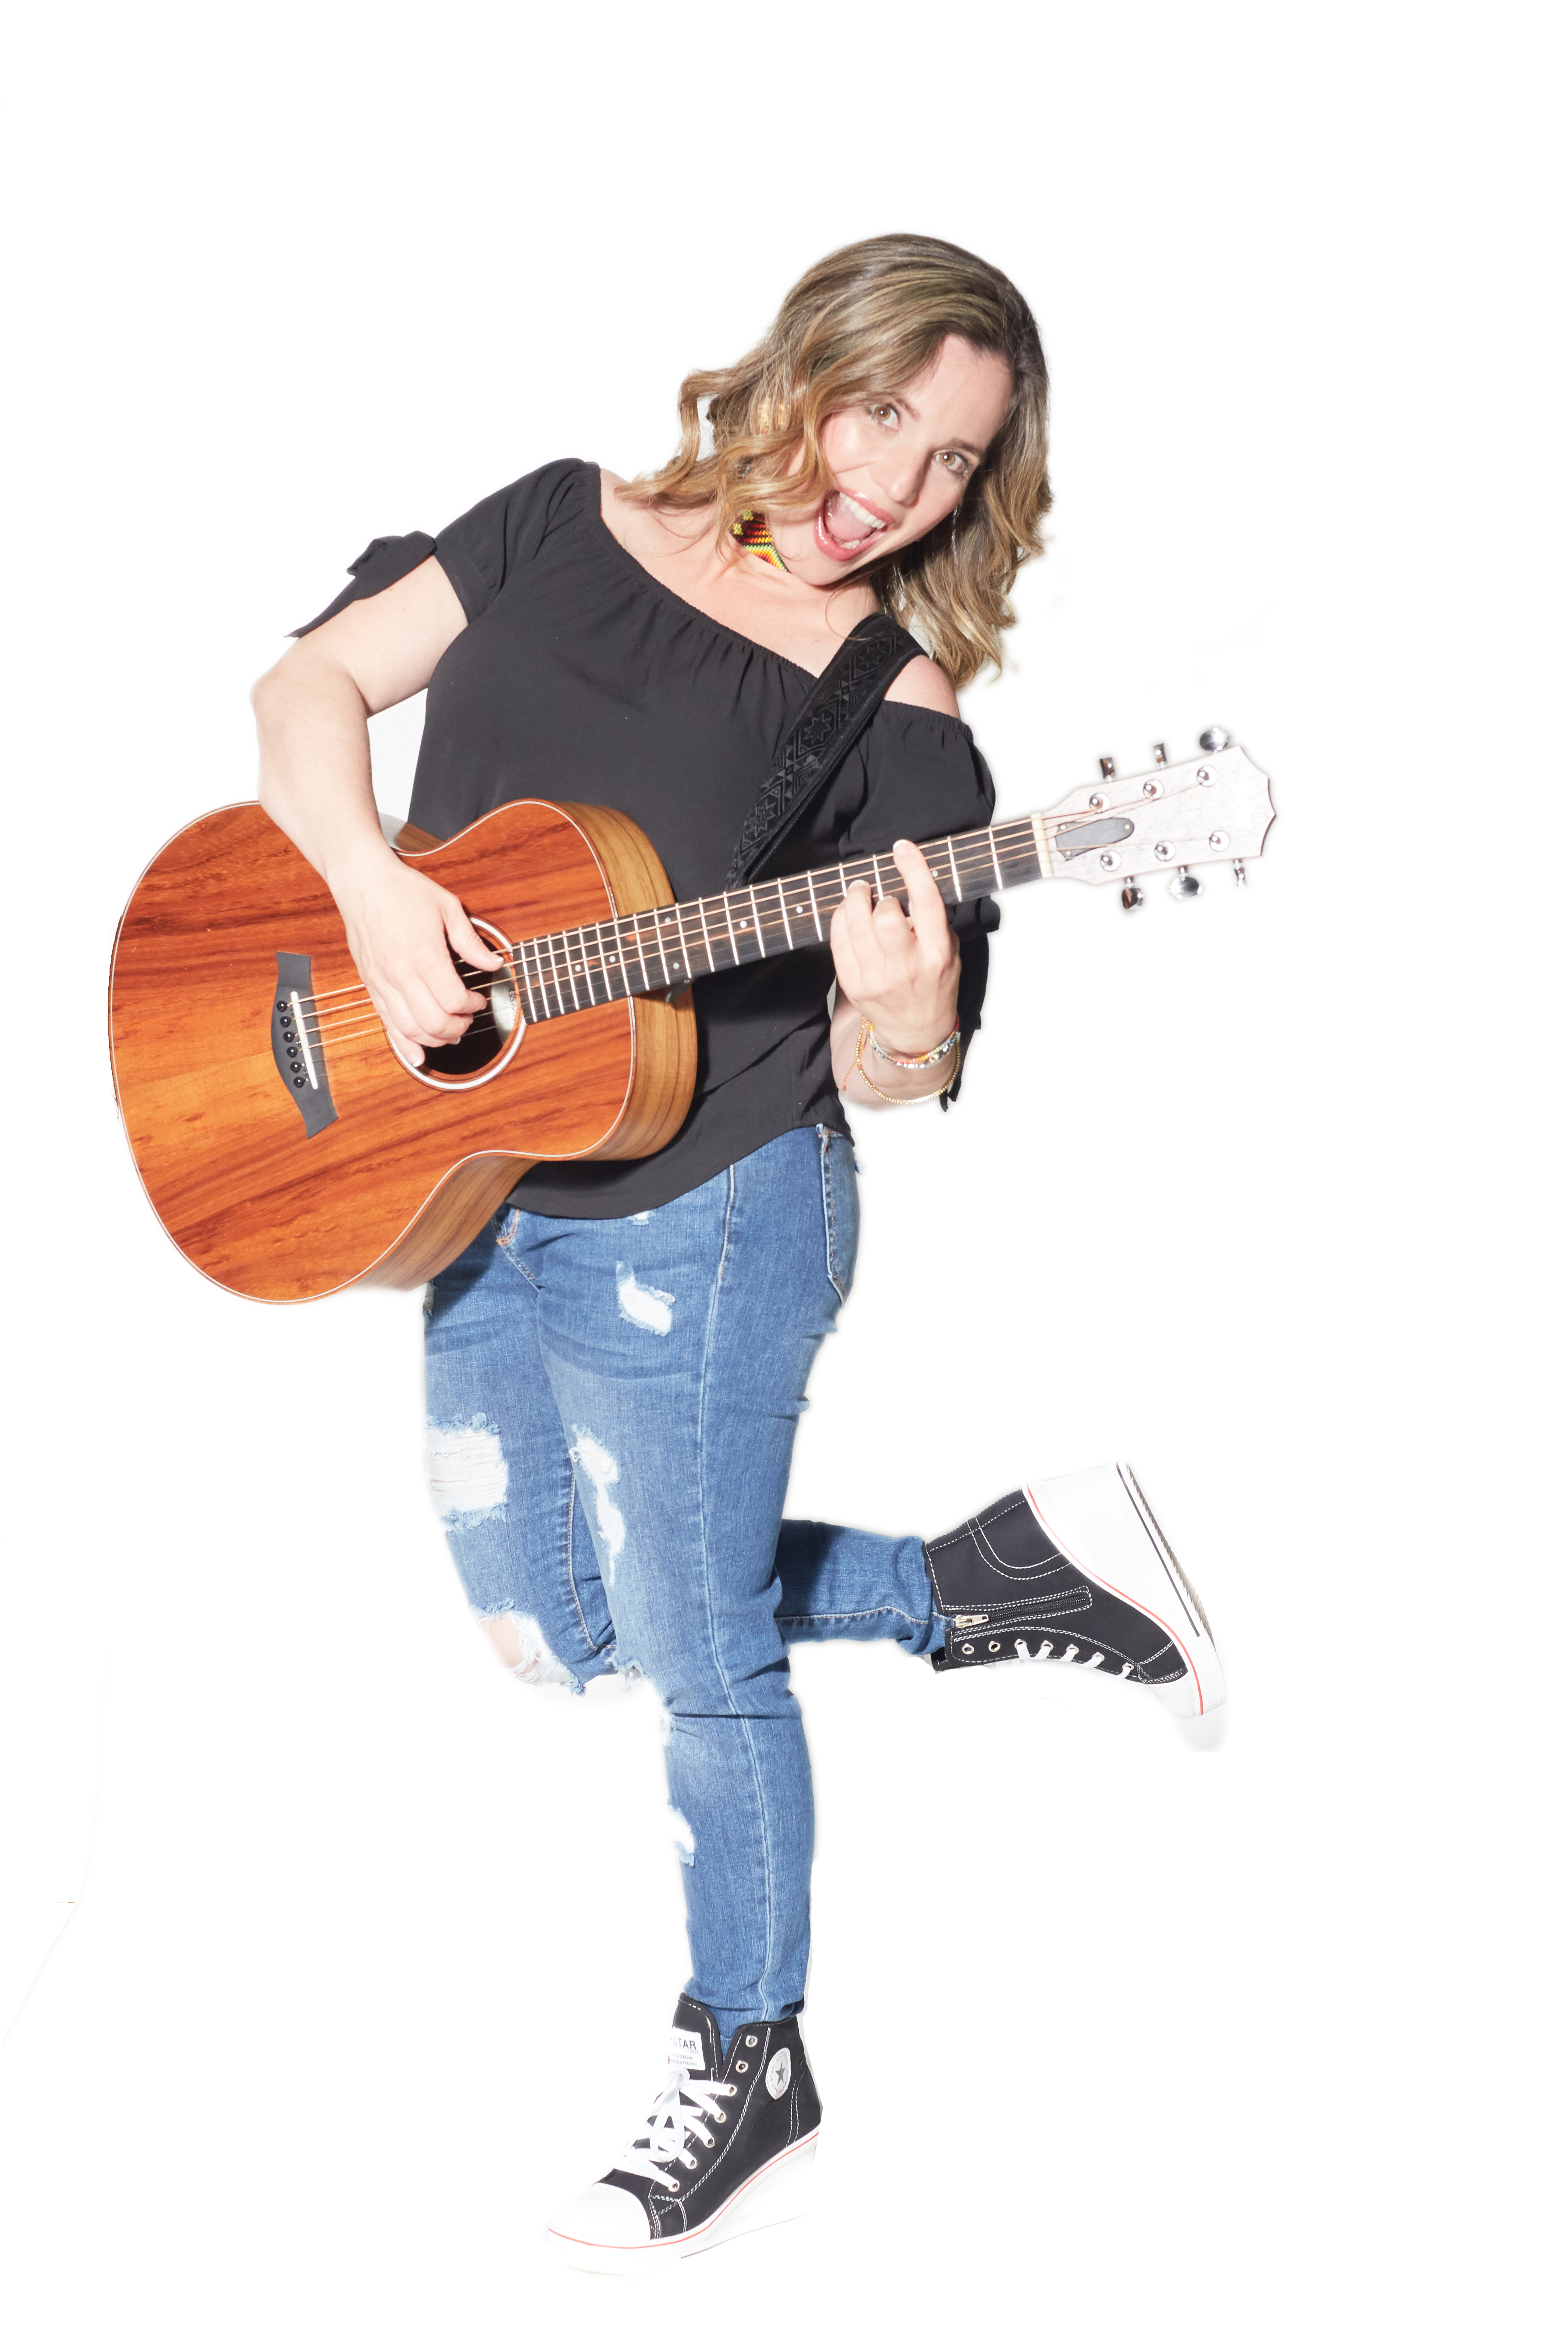 Nathalia holding an acoustic guitar against a white background